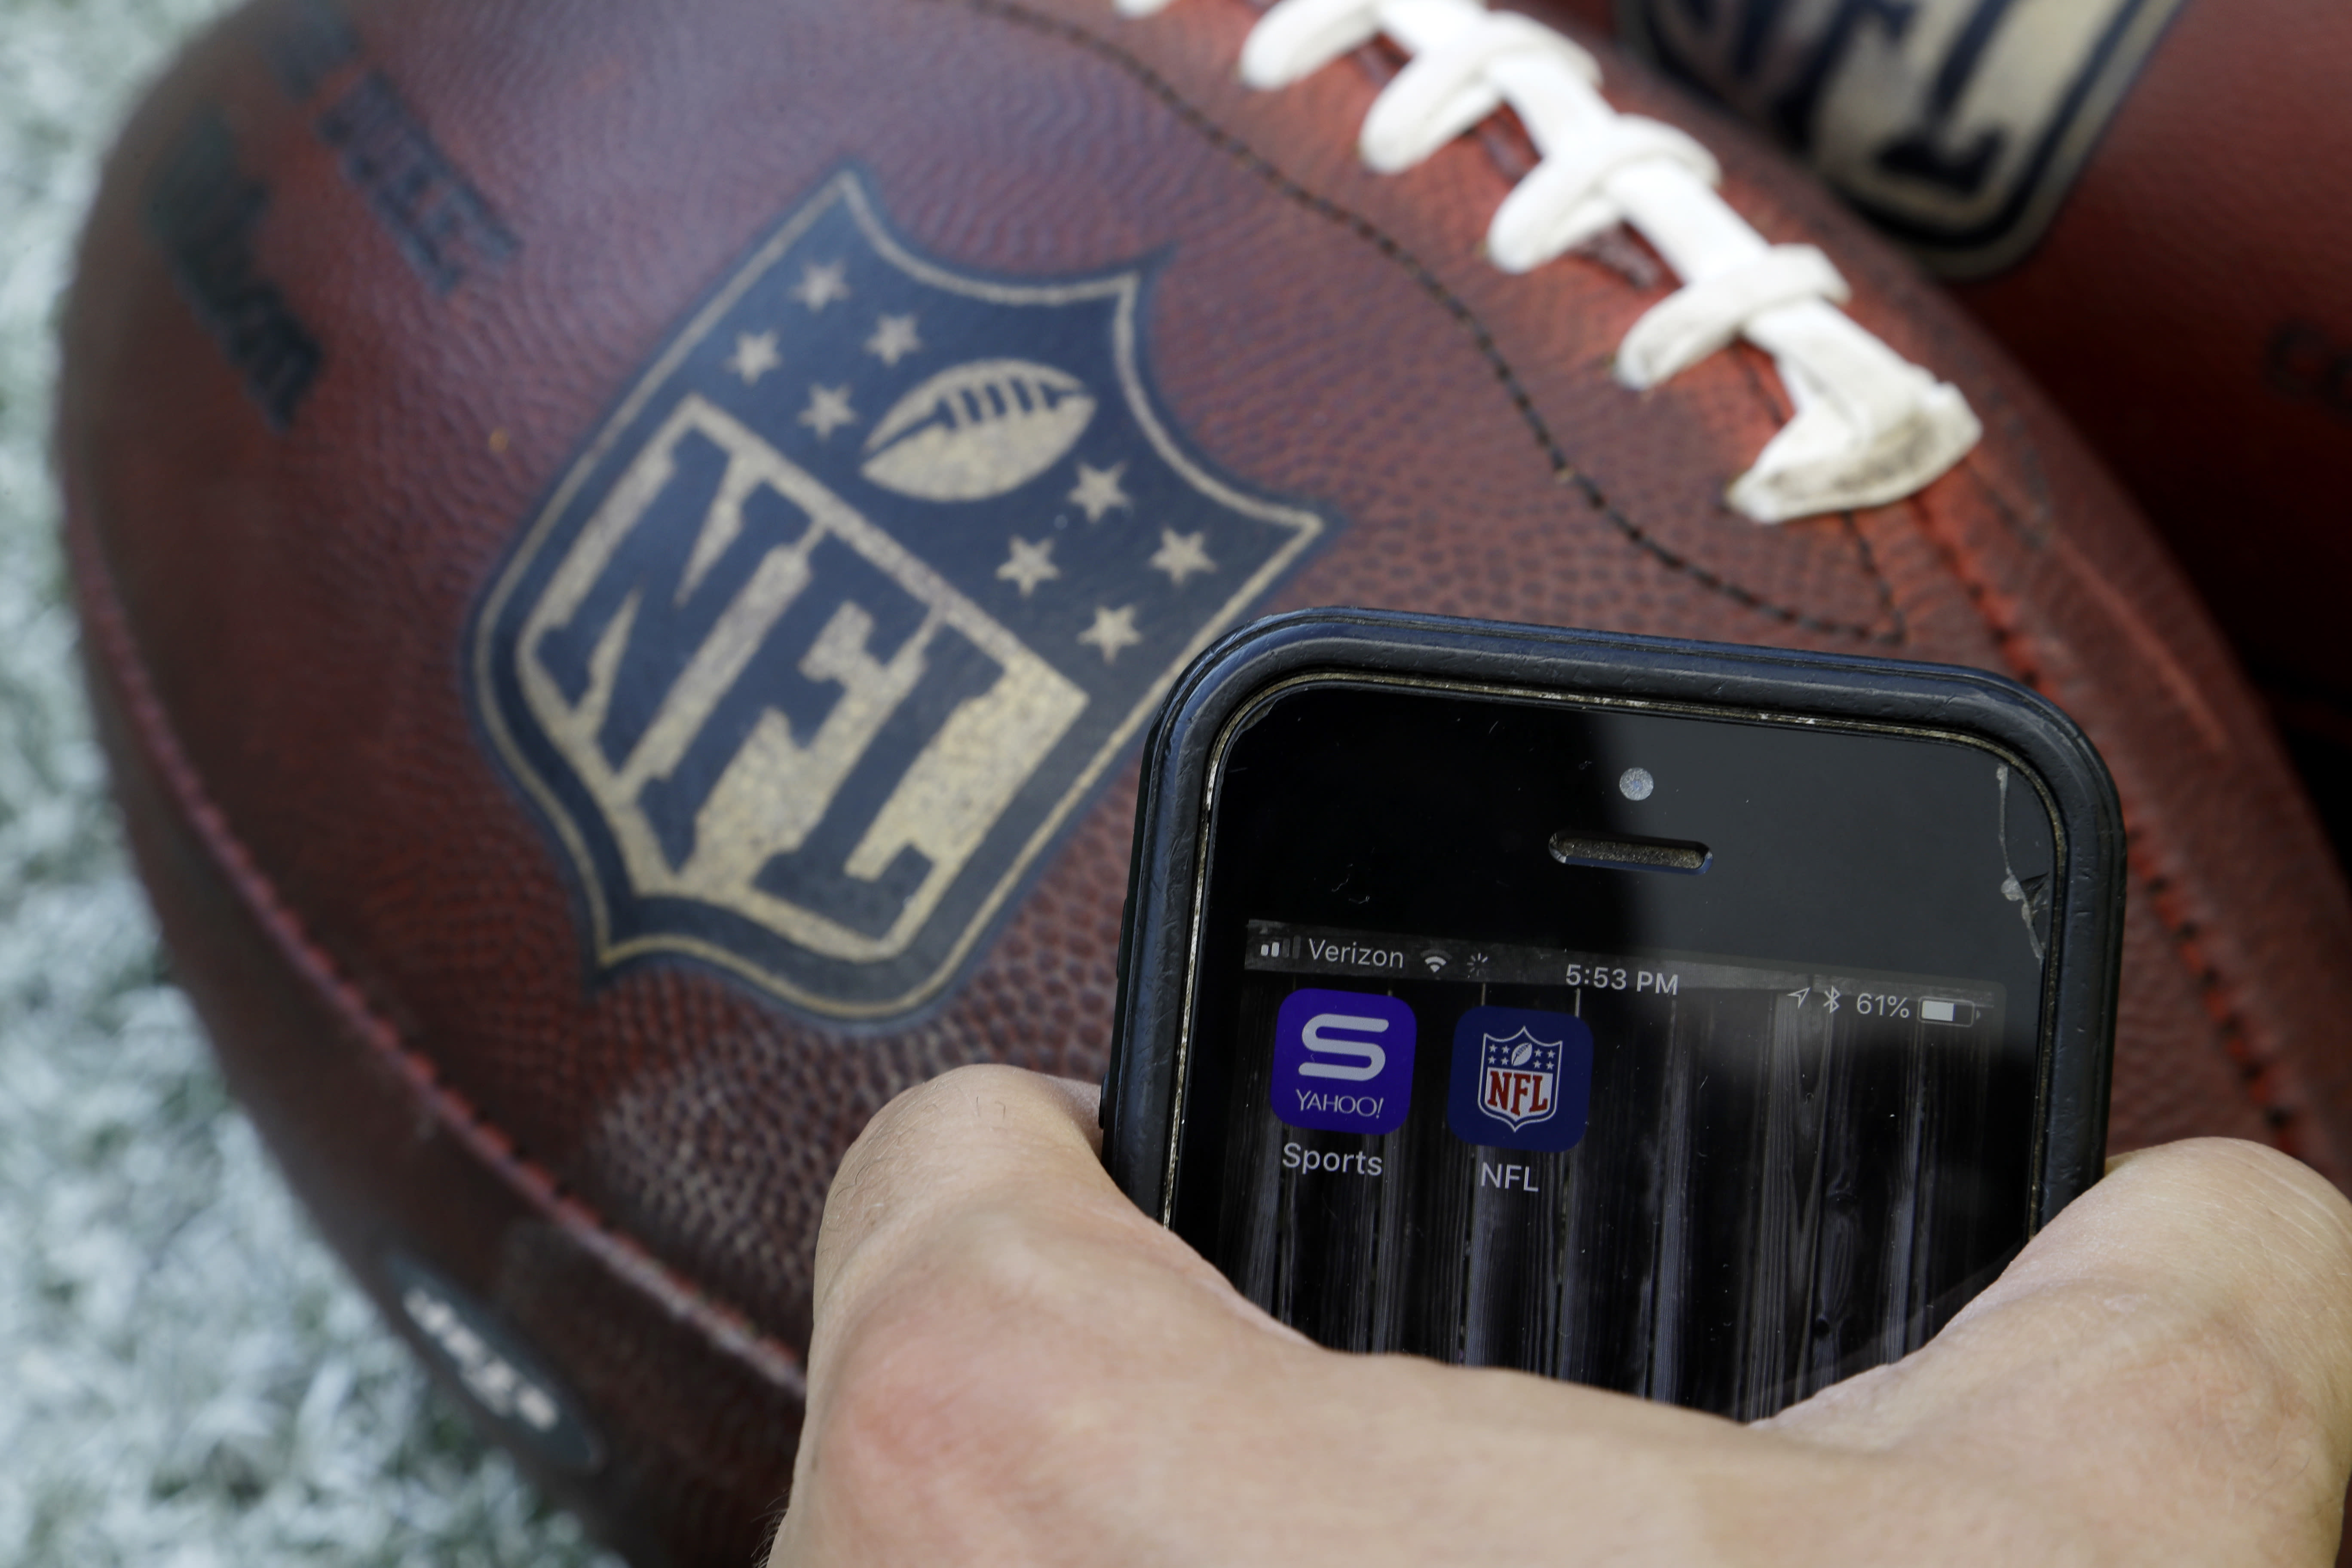 Subscription-free streaming for NFL games